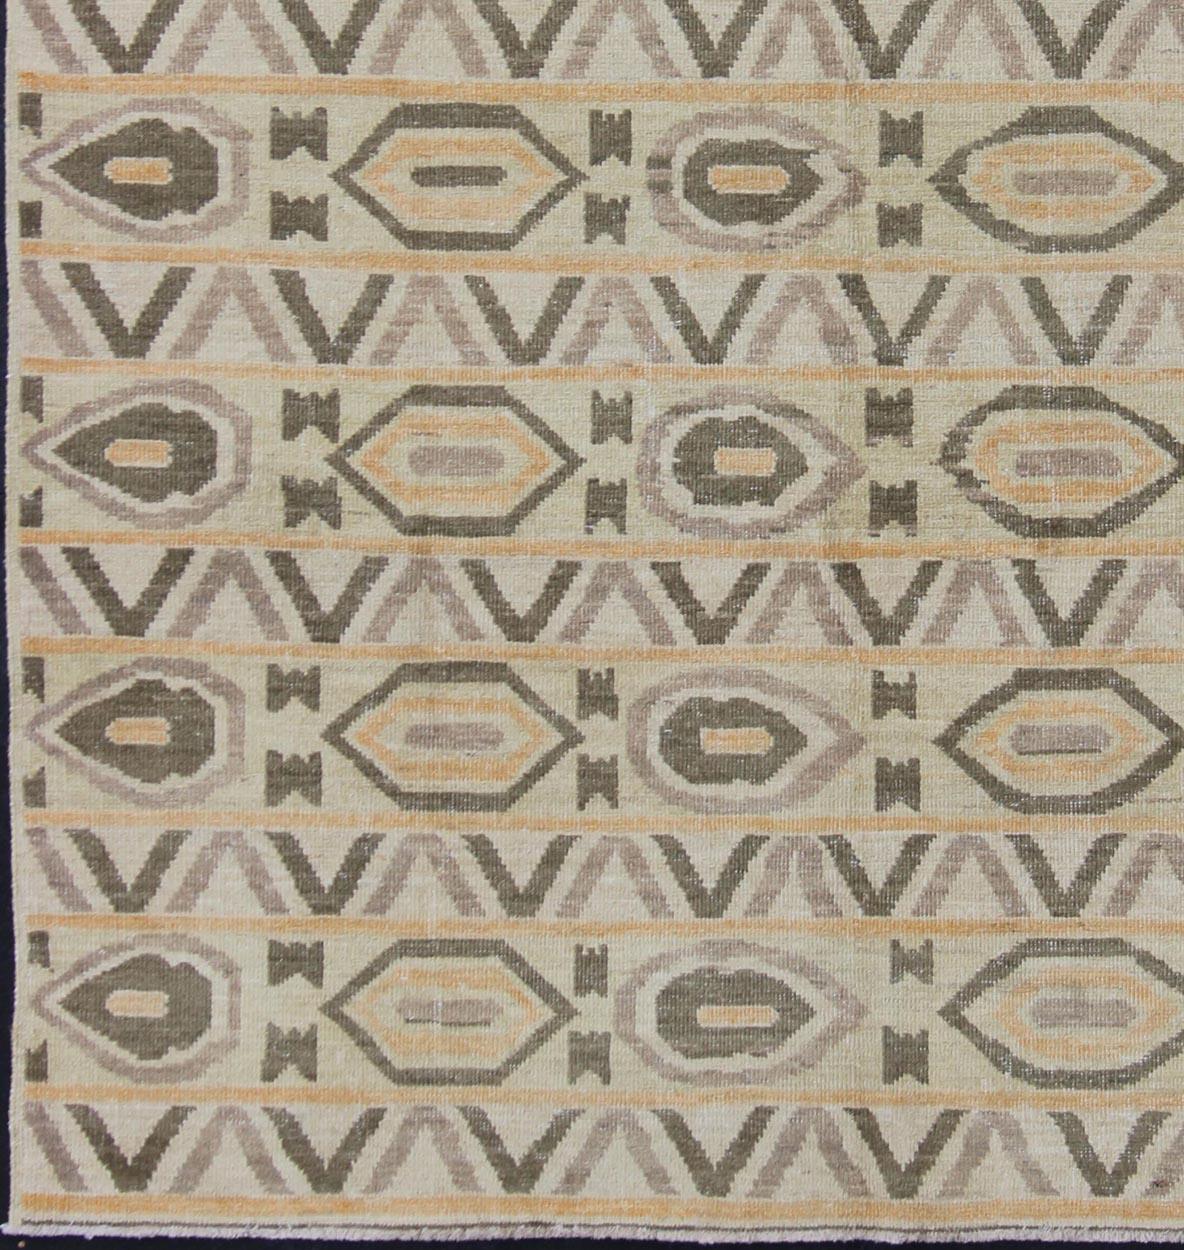 Modern rug Afghan Tribal all-over design, rug 1912-261 country of origin / type: Afghan / Tribal

This tribal Afghan rug with a modern design rendered in an all over Modern pattern, features a cream background, dark olive green and faded orange